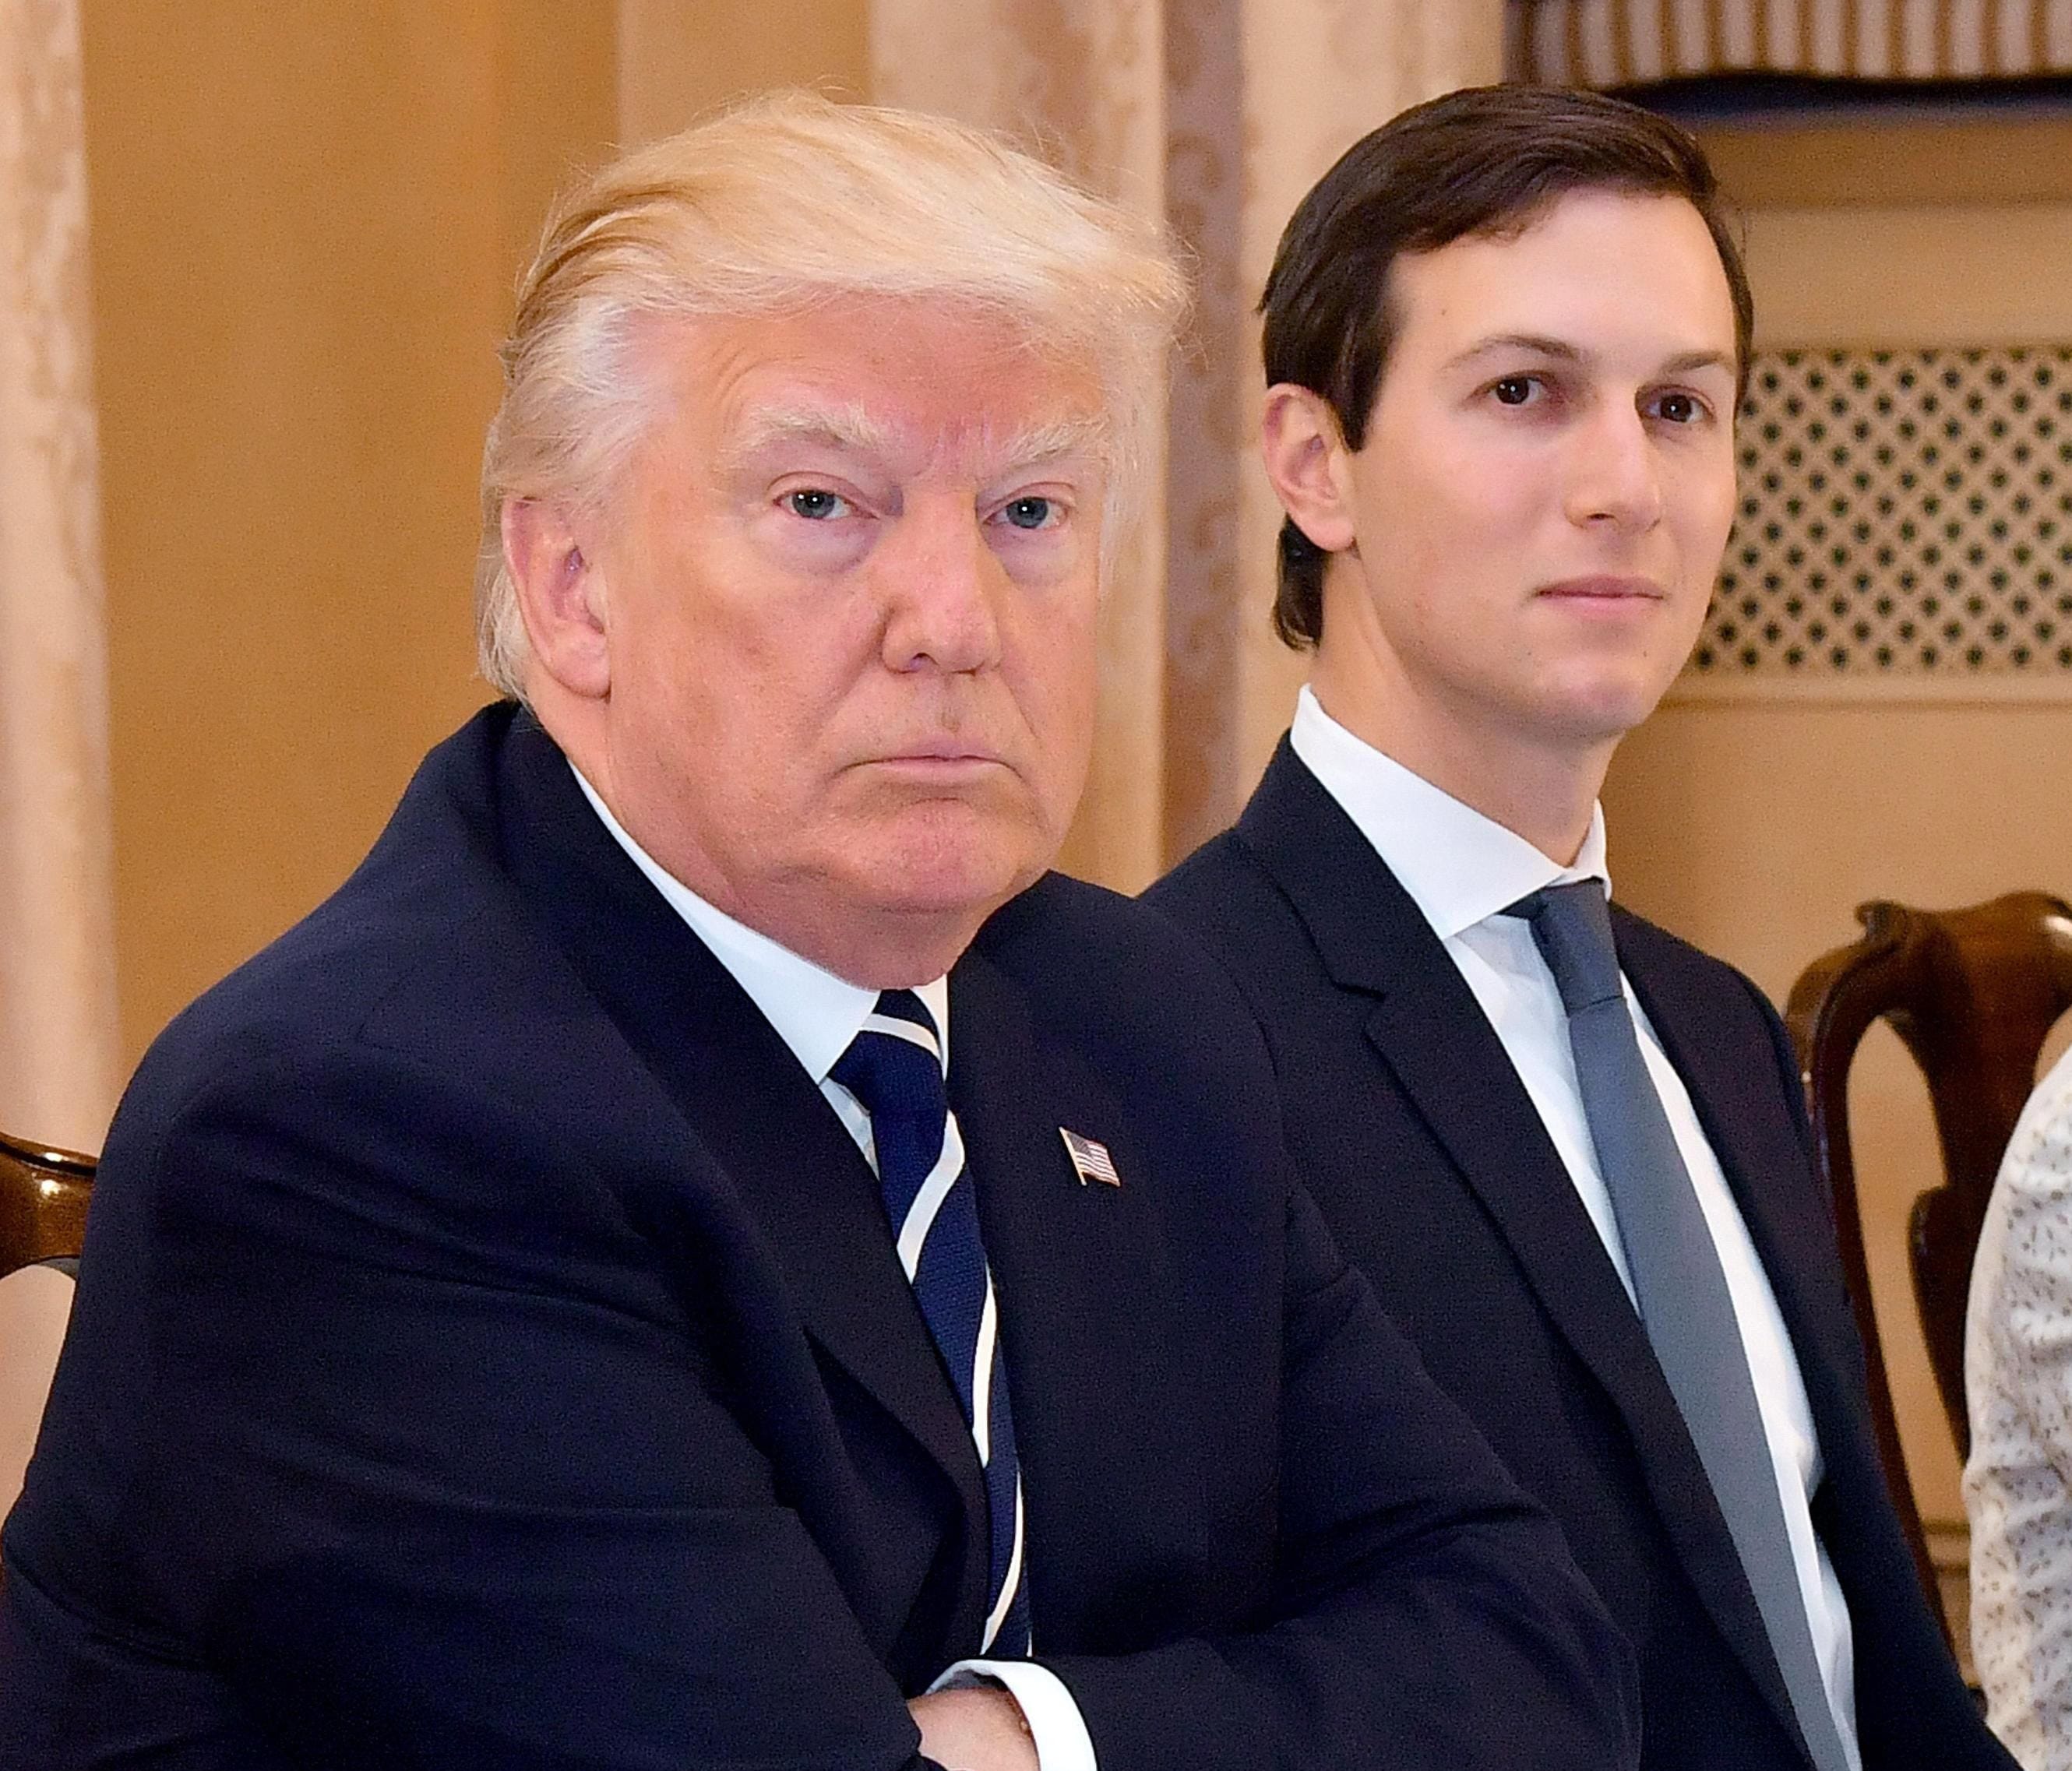 President Trump is flanked by senior adviser and son-in-law Jared Kushner during a meeting with Italian Prime Minister Paolo Gentiloni at Villa Taverna in Rome May 24.